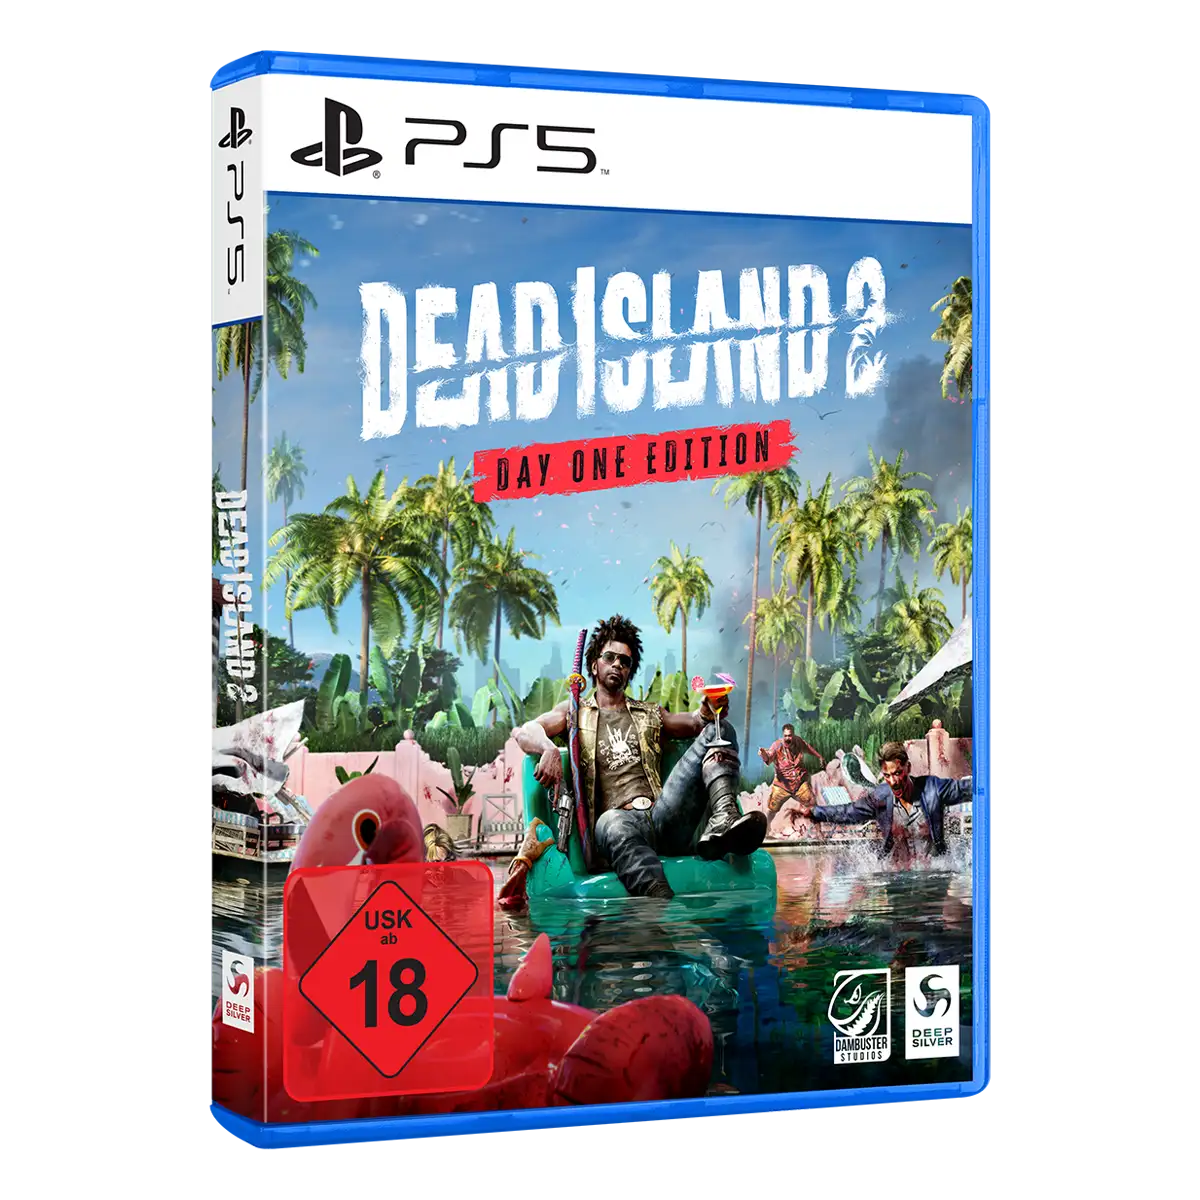 Dead Island 2 Day One Edition (PS5) (USK) Image 2